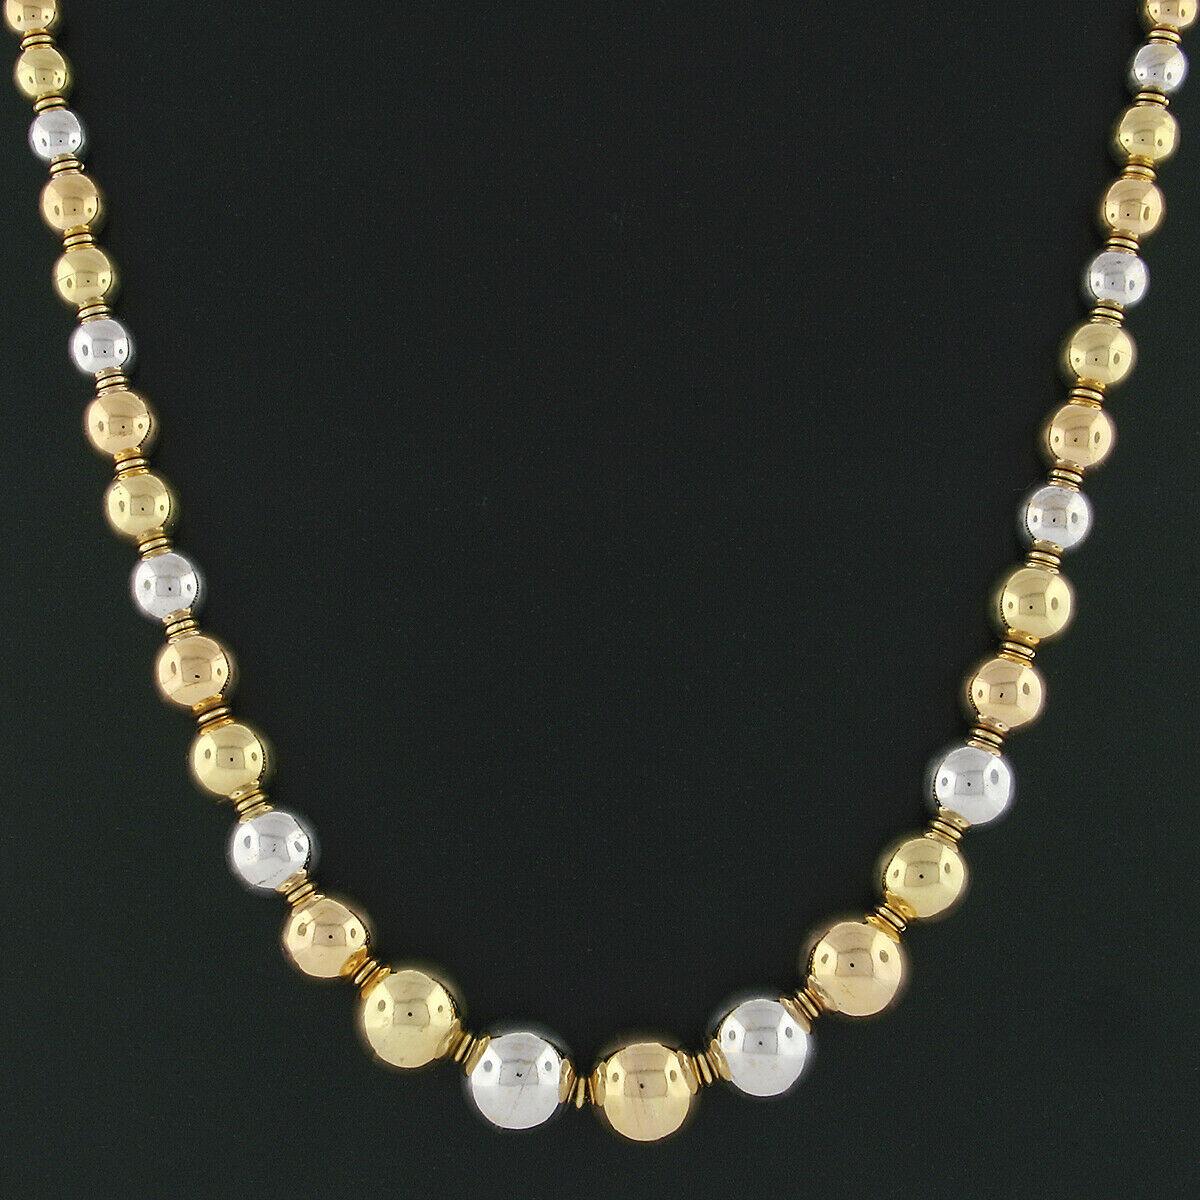 Here we have a unique vintage statement piece that's crafted in Italy from solid 18k gold. It features smooth and polished gold ball beads that graduate in size from approximately 6mm at the back to approximately 14.3mm at the front. These beads